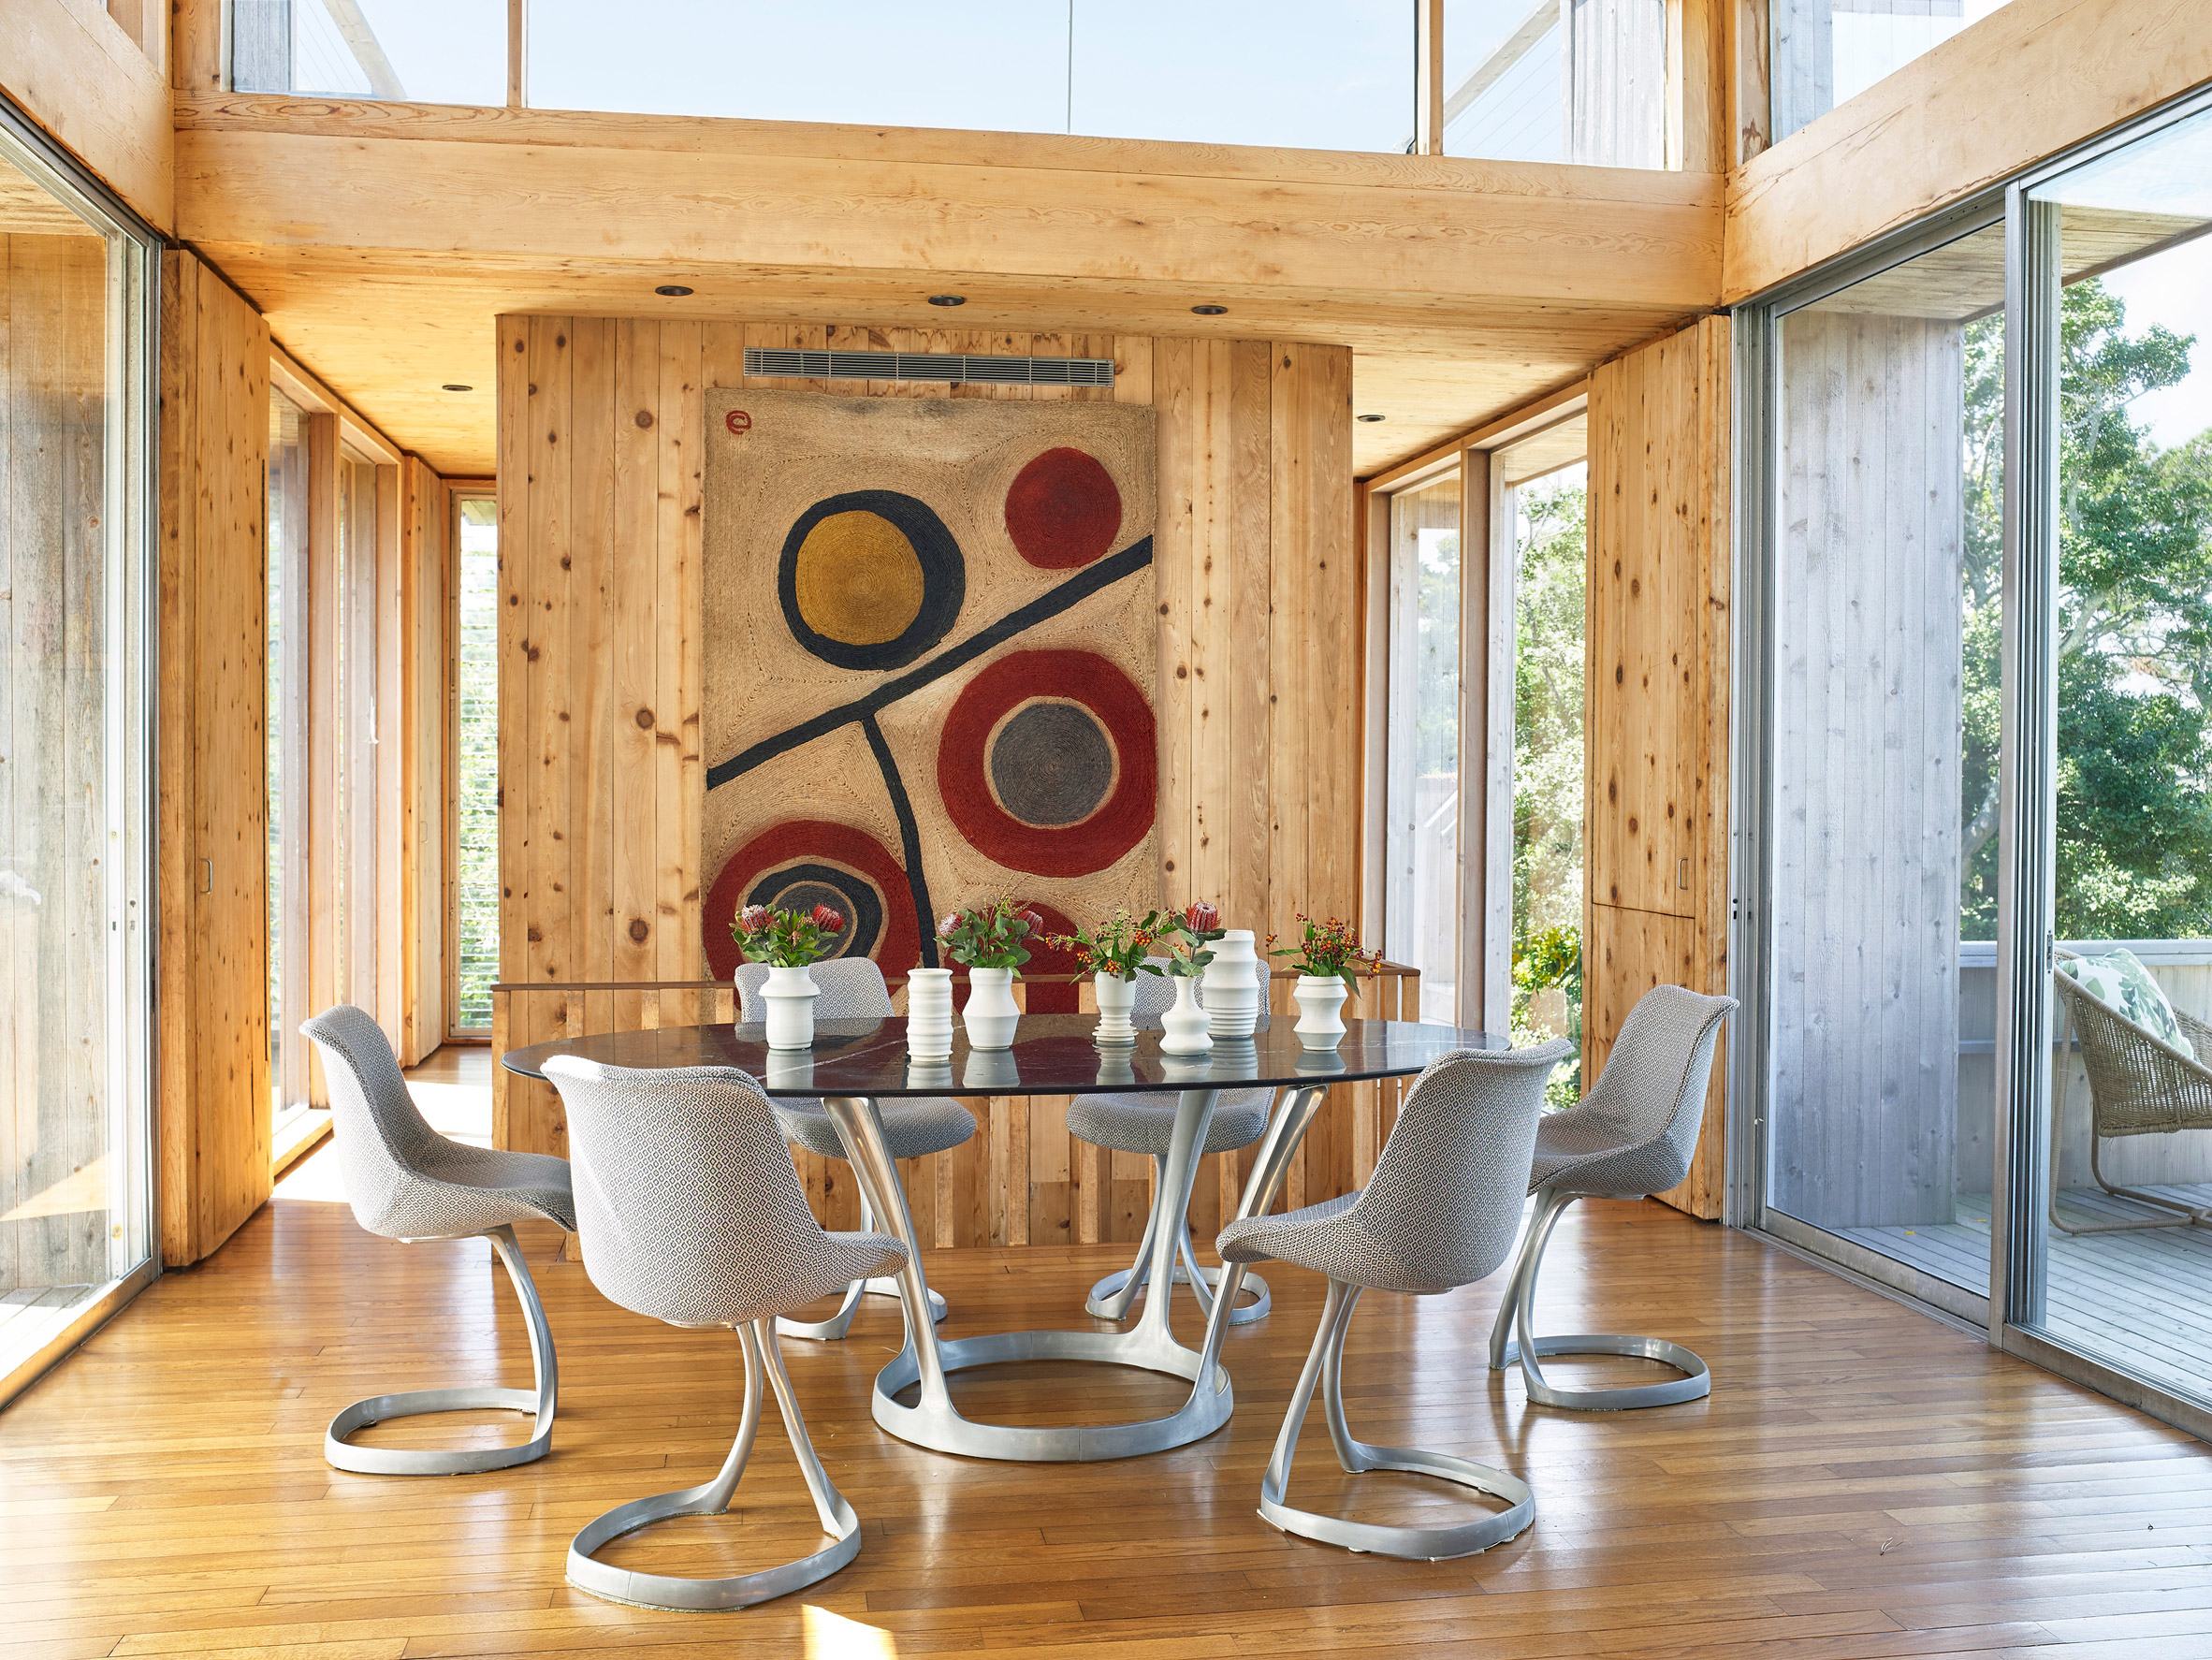 Restored interiors of 1960s house on Fire Island